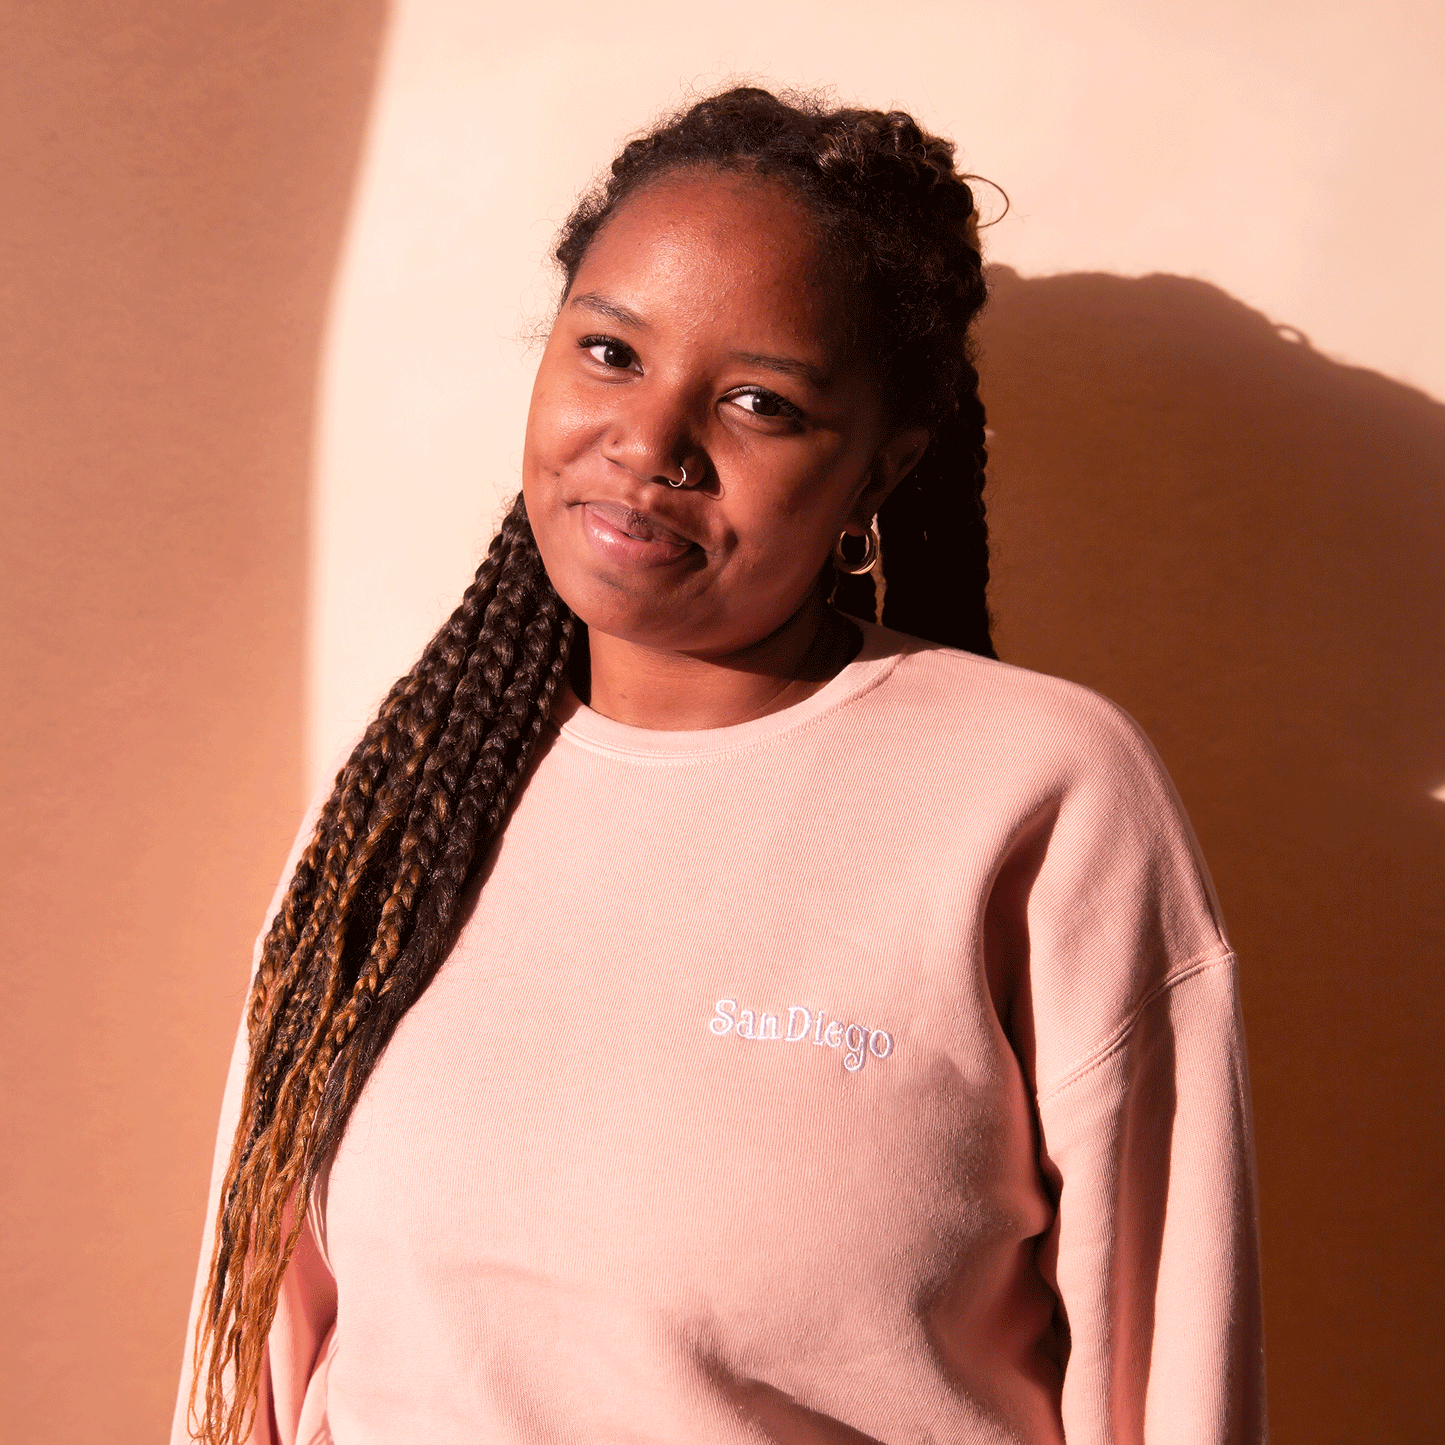 On a peach background is a peachy pink pull over sweatshirt with a white embroidered "San Diego" on the front. 